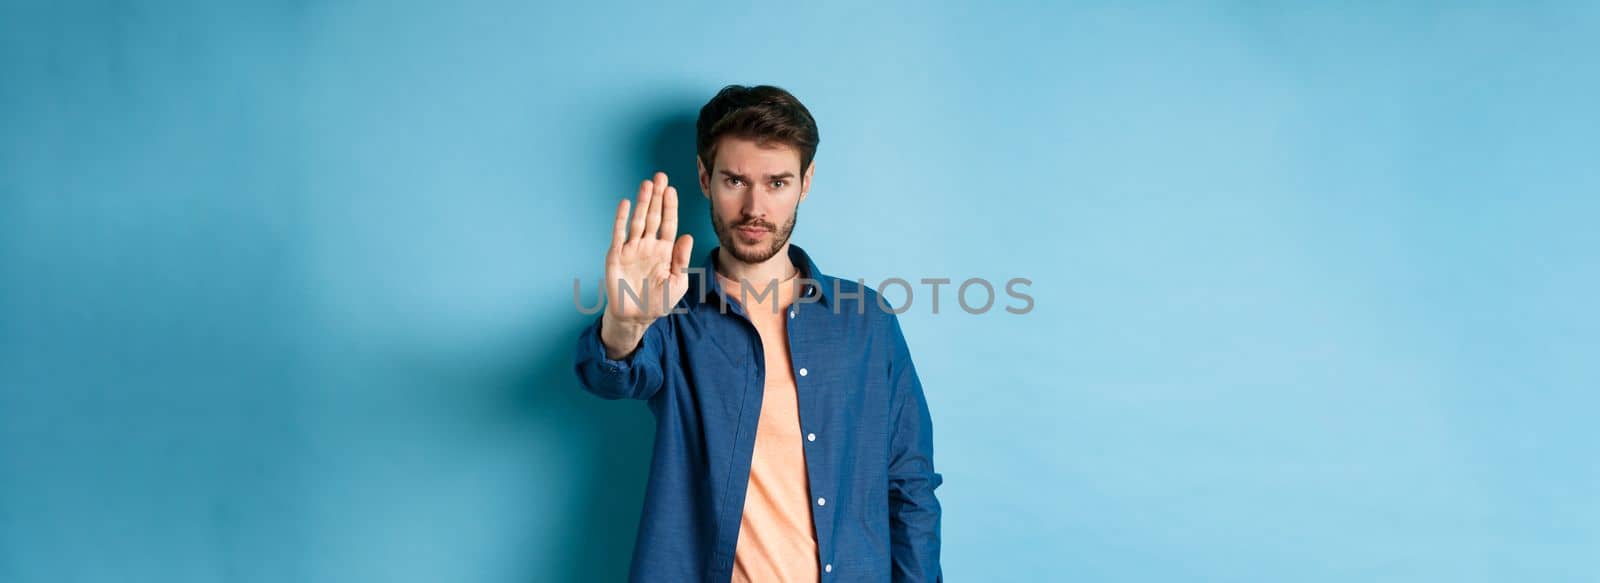 Upset man frowning and asking to stop, stretch out hand to prohibit or disagree with something bad, standing on blue background by Benzoix